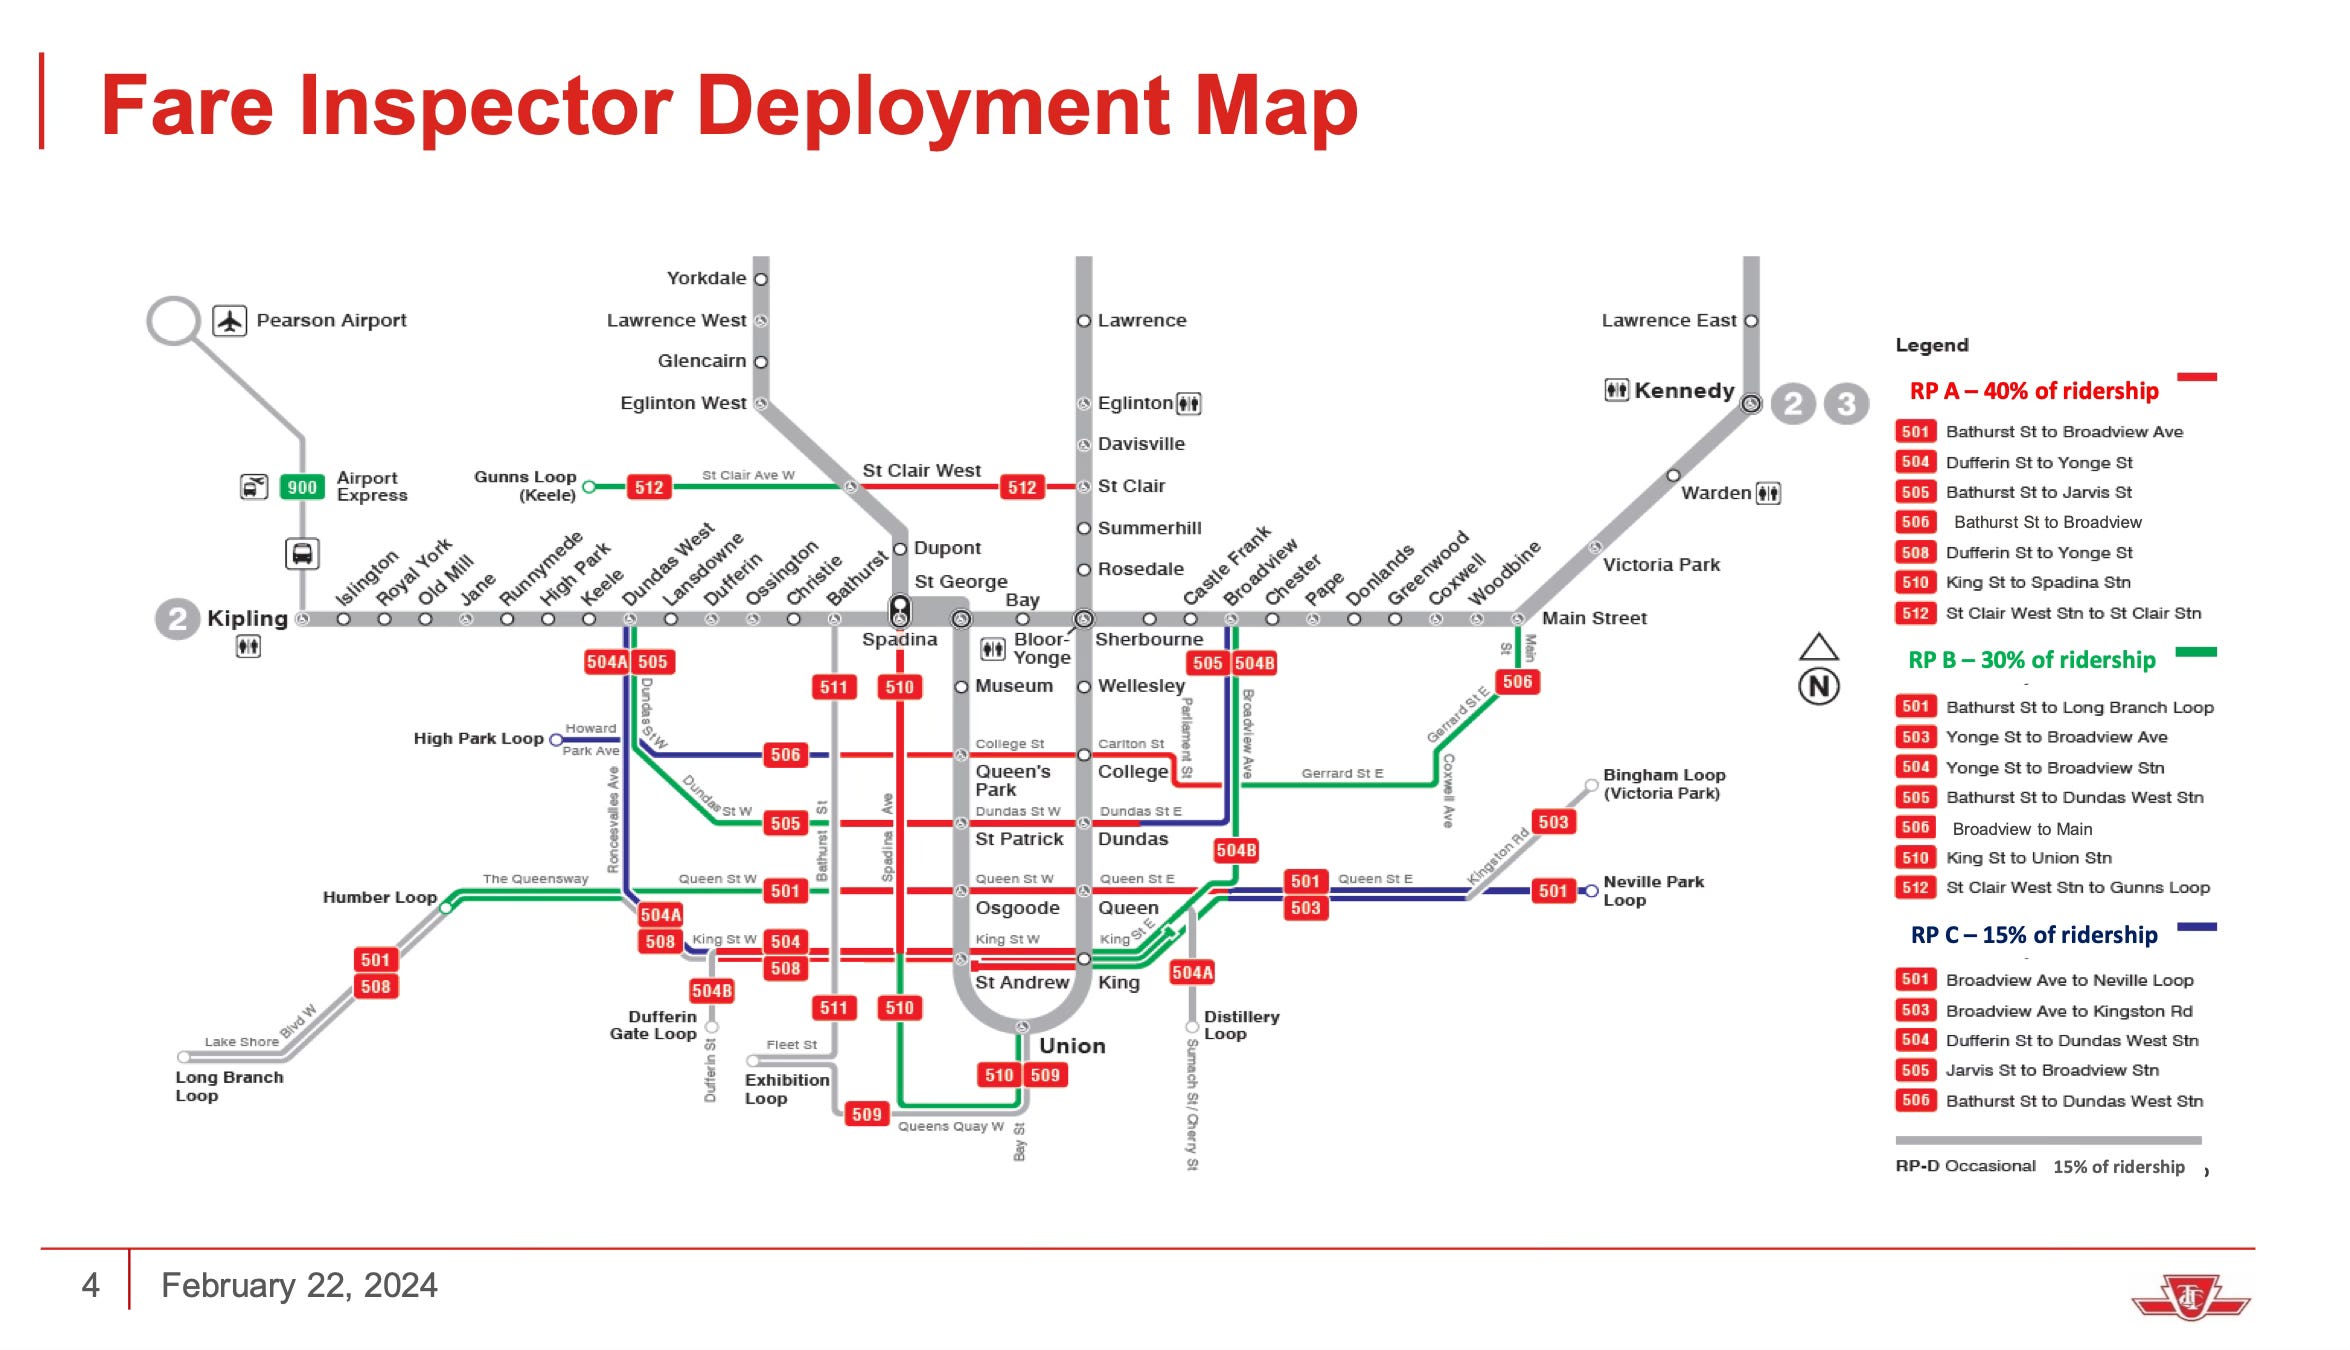 A TTC system map showing areas where the agency plans to prioritize fare inspections